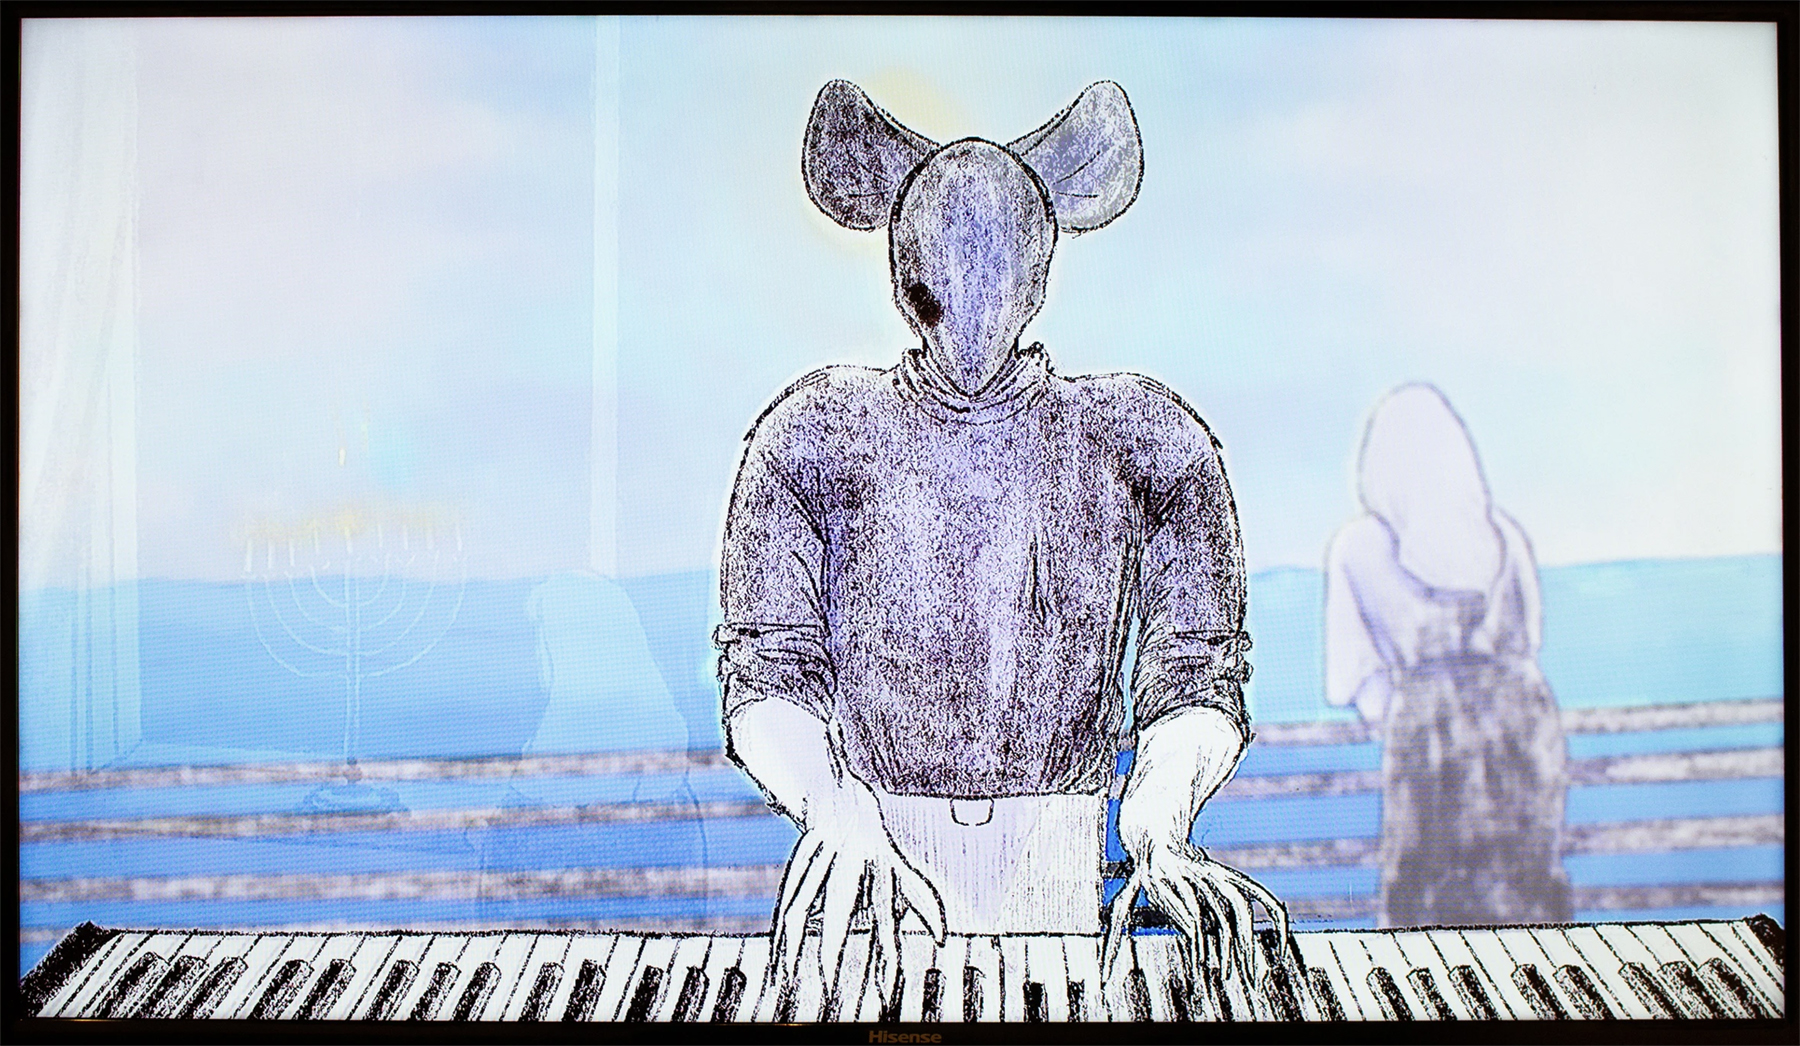 Still image from the Rotoscope and 2D animation "Time's Song" by Chana Stern, image courtesy of the artist